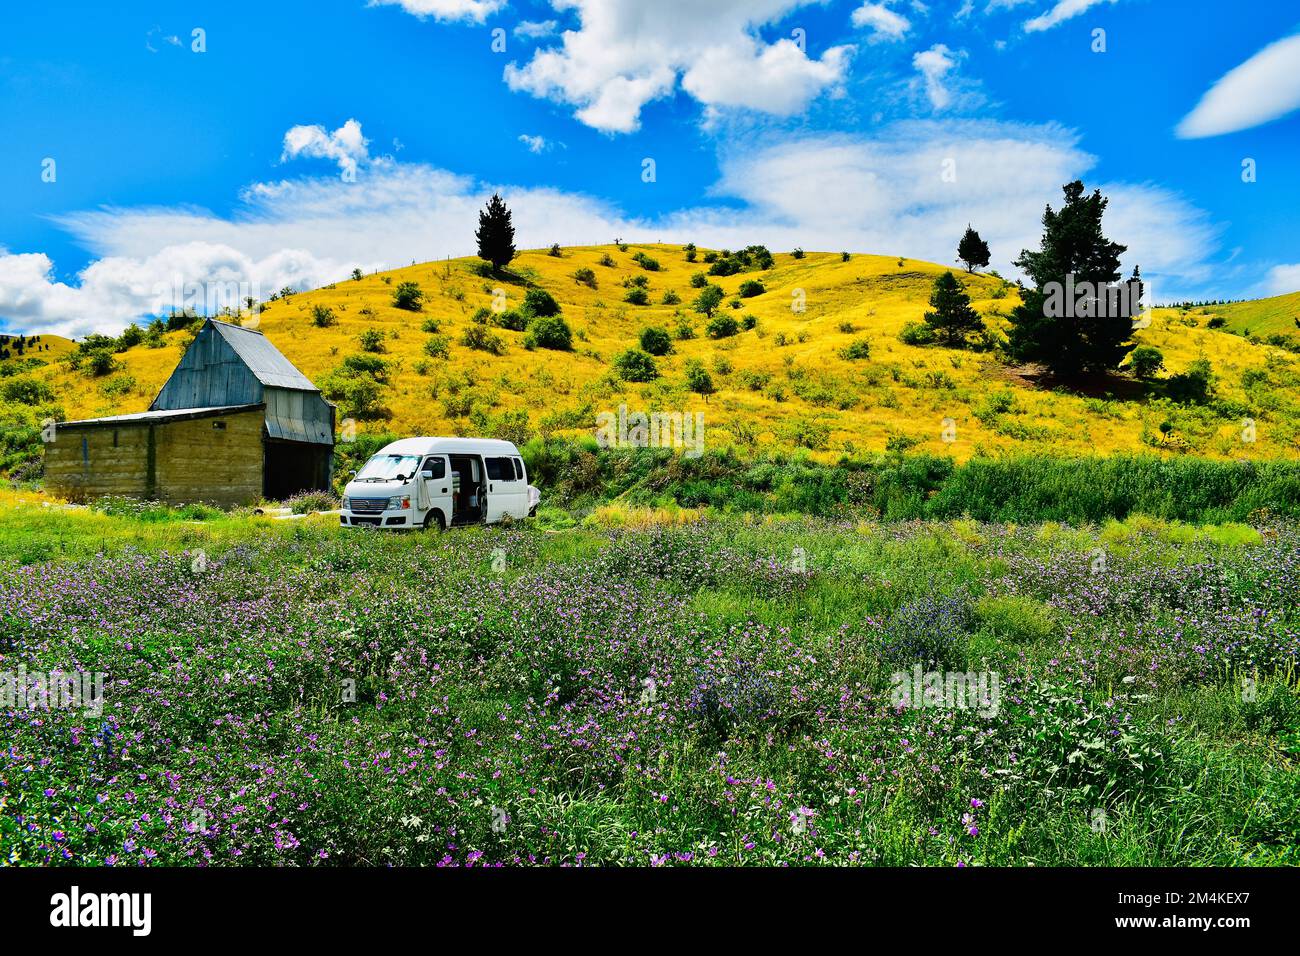 workers van in rural campsite at orchard. Stock Photo